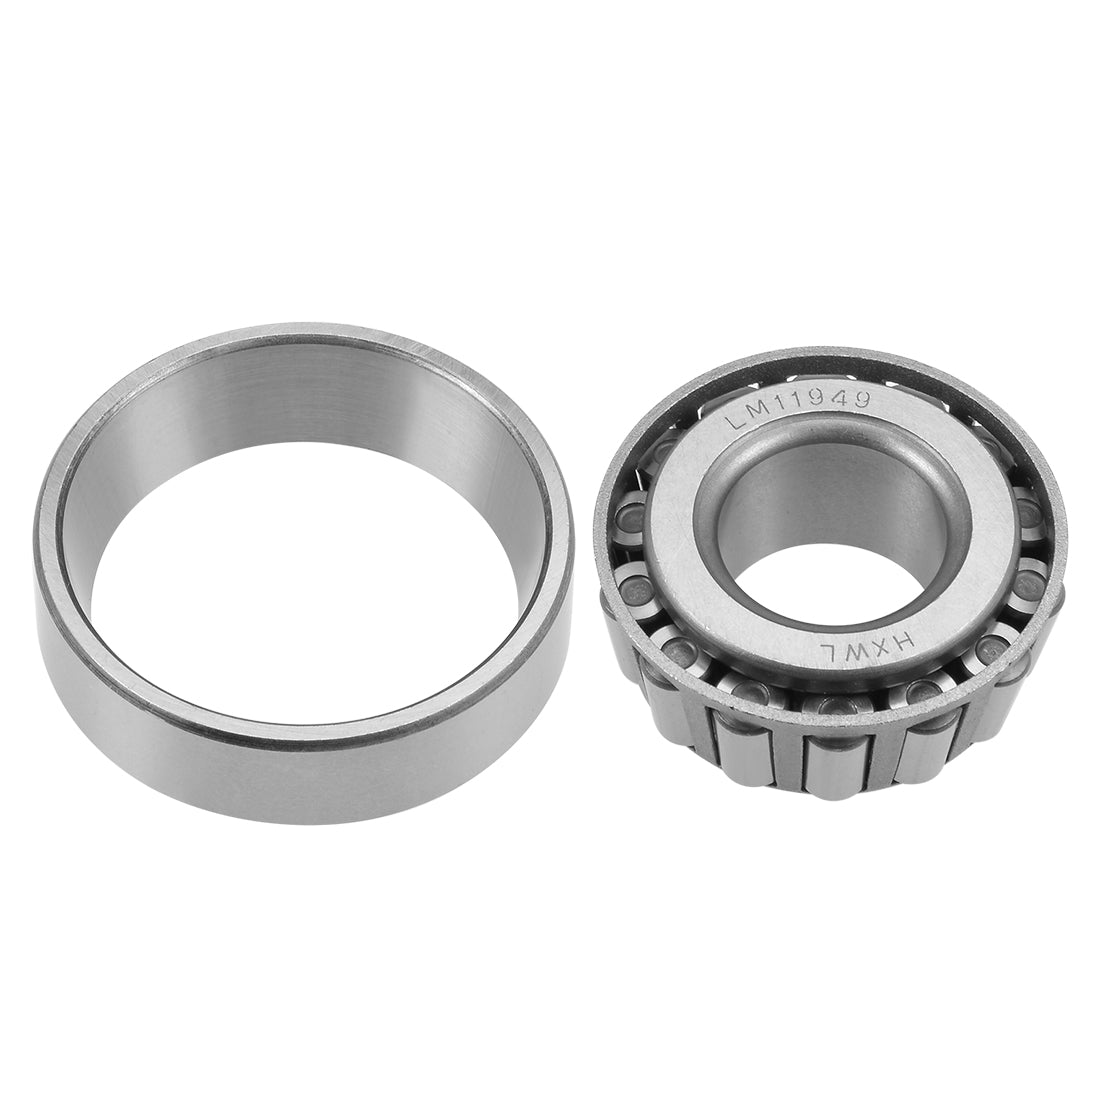 uxcell Uxcell LM11949/10 Tapered Roller Bearing Cone and Cup Set 0.75" Bore 1.781" O.D.